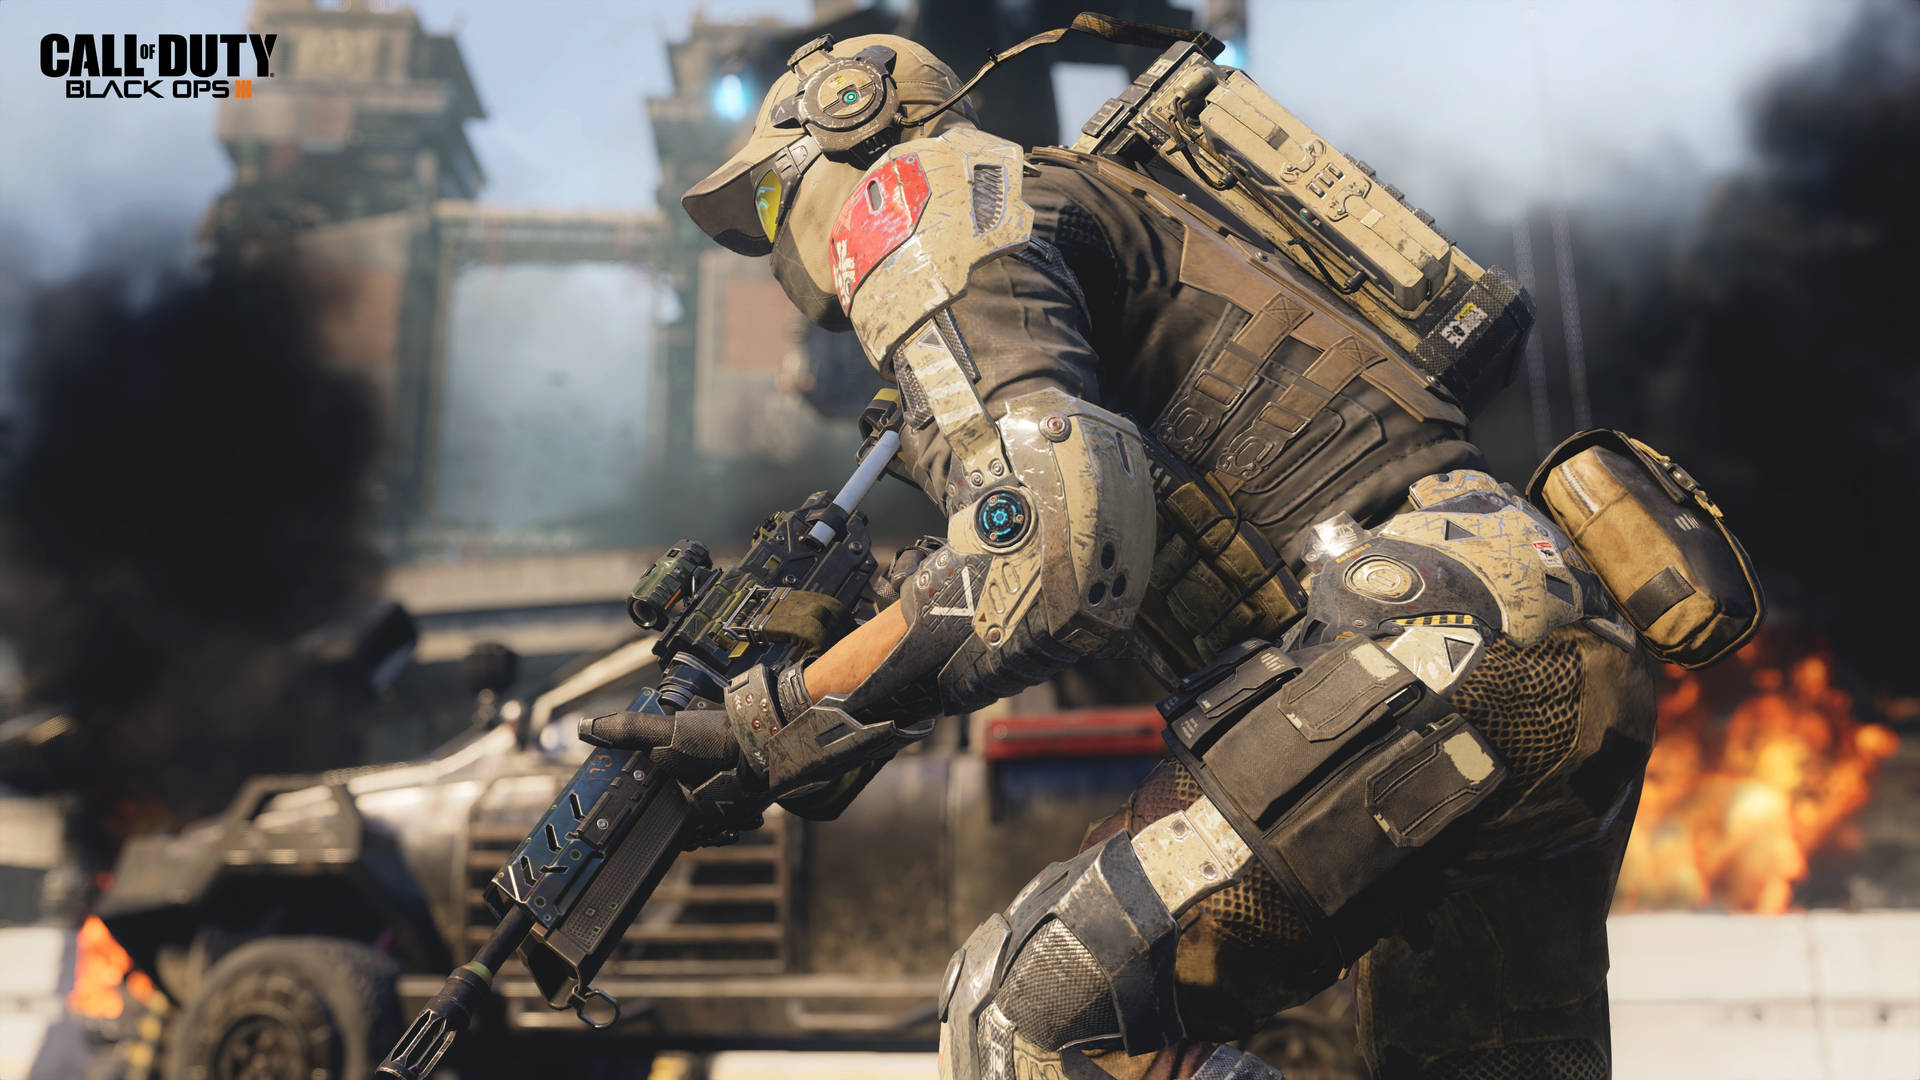 The Ultimate Call of Duty: Black Ops III Wallpaper